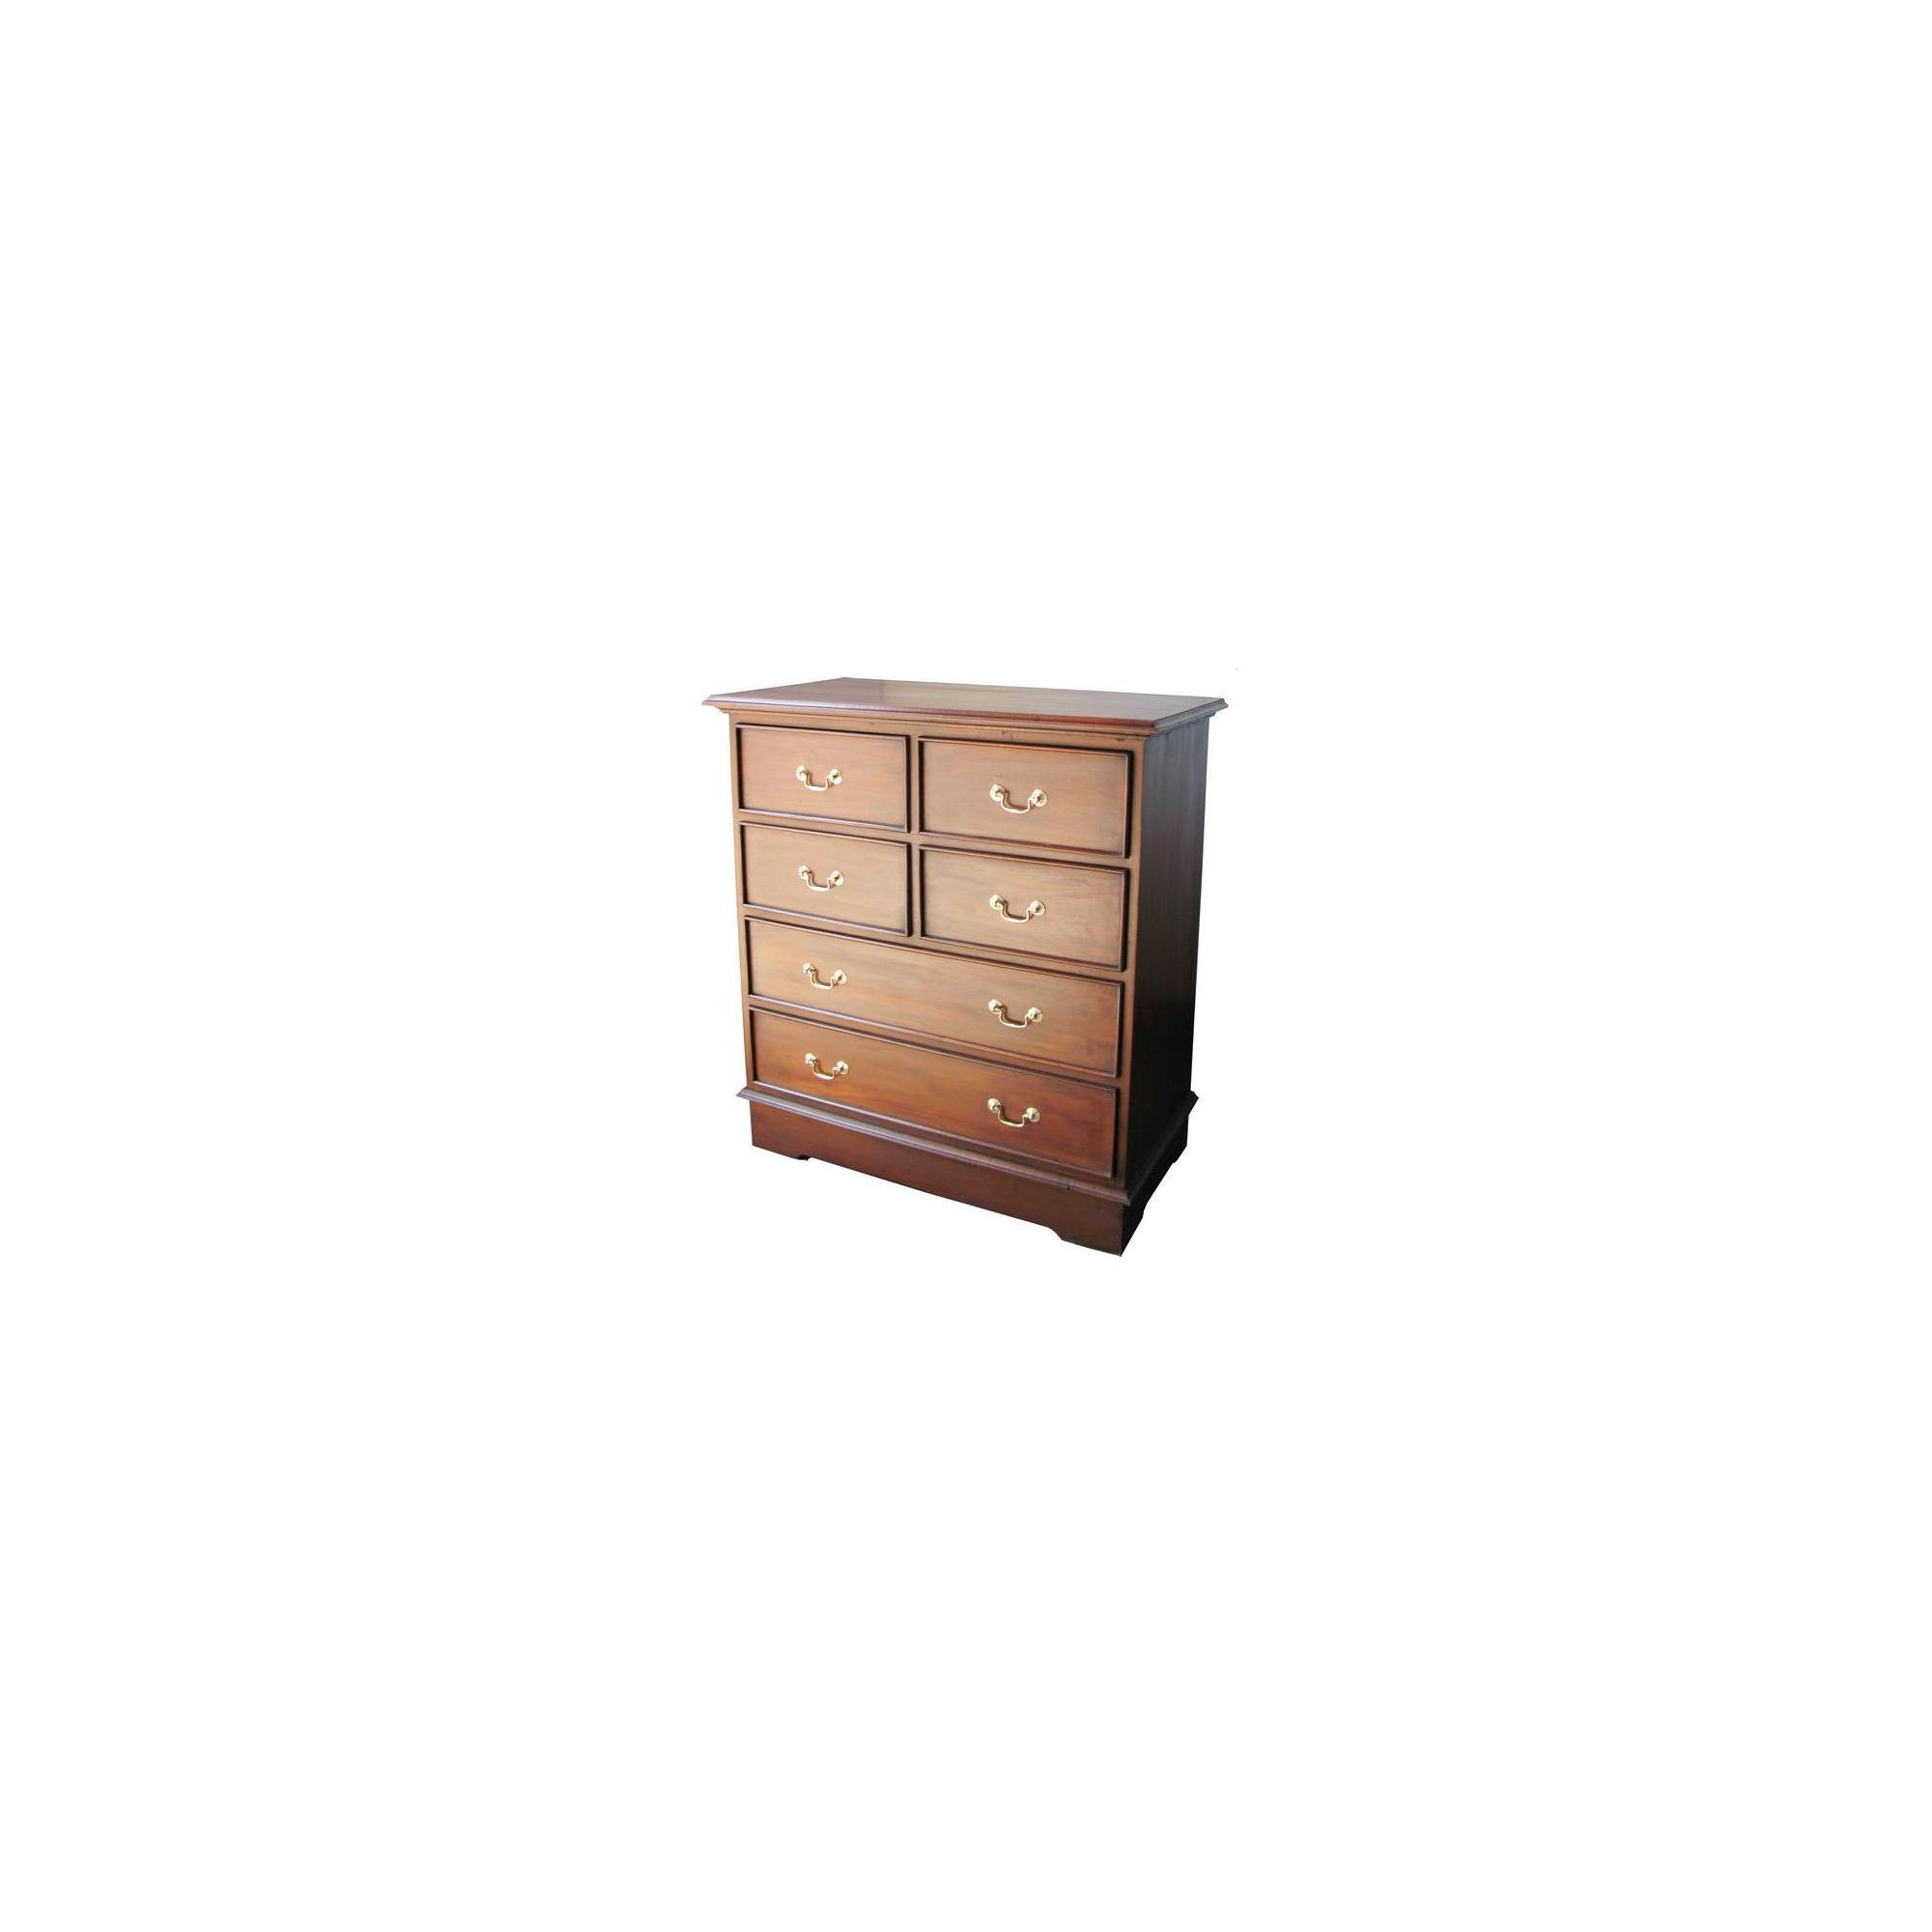 Lock stock and barrel Mahogany 4 over 2 Drawer Chest - Wax at Tesco Direct